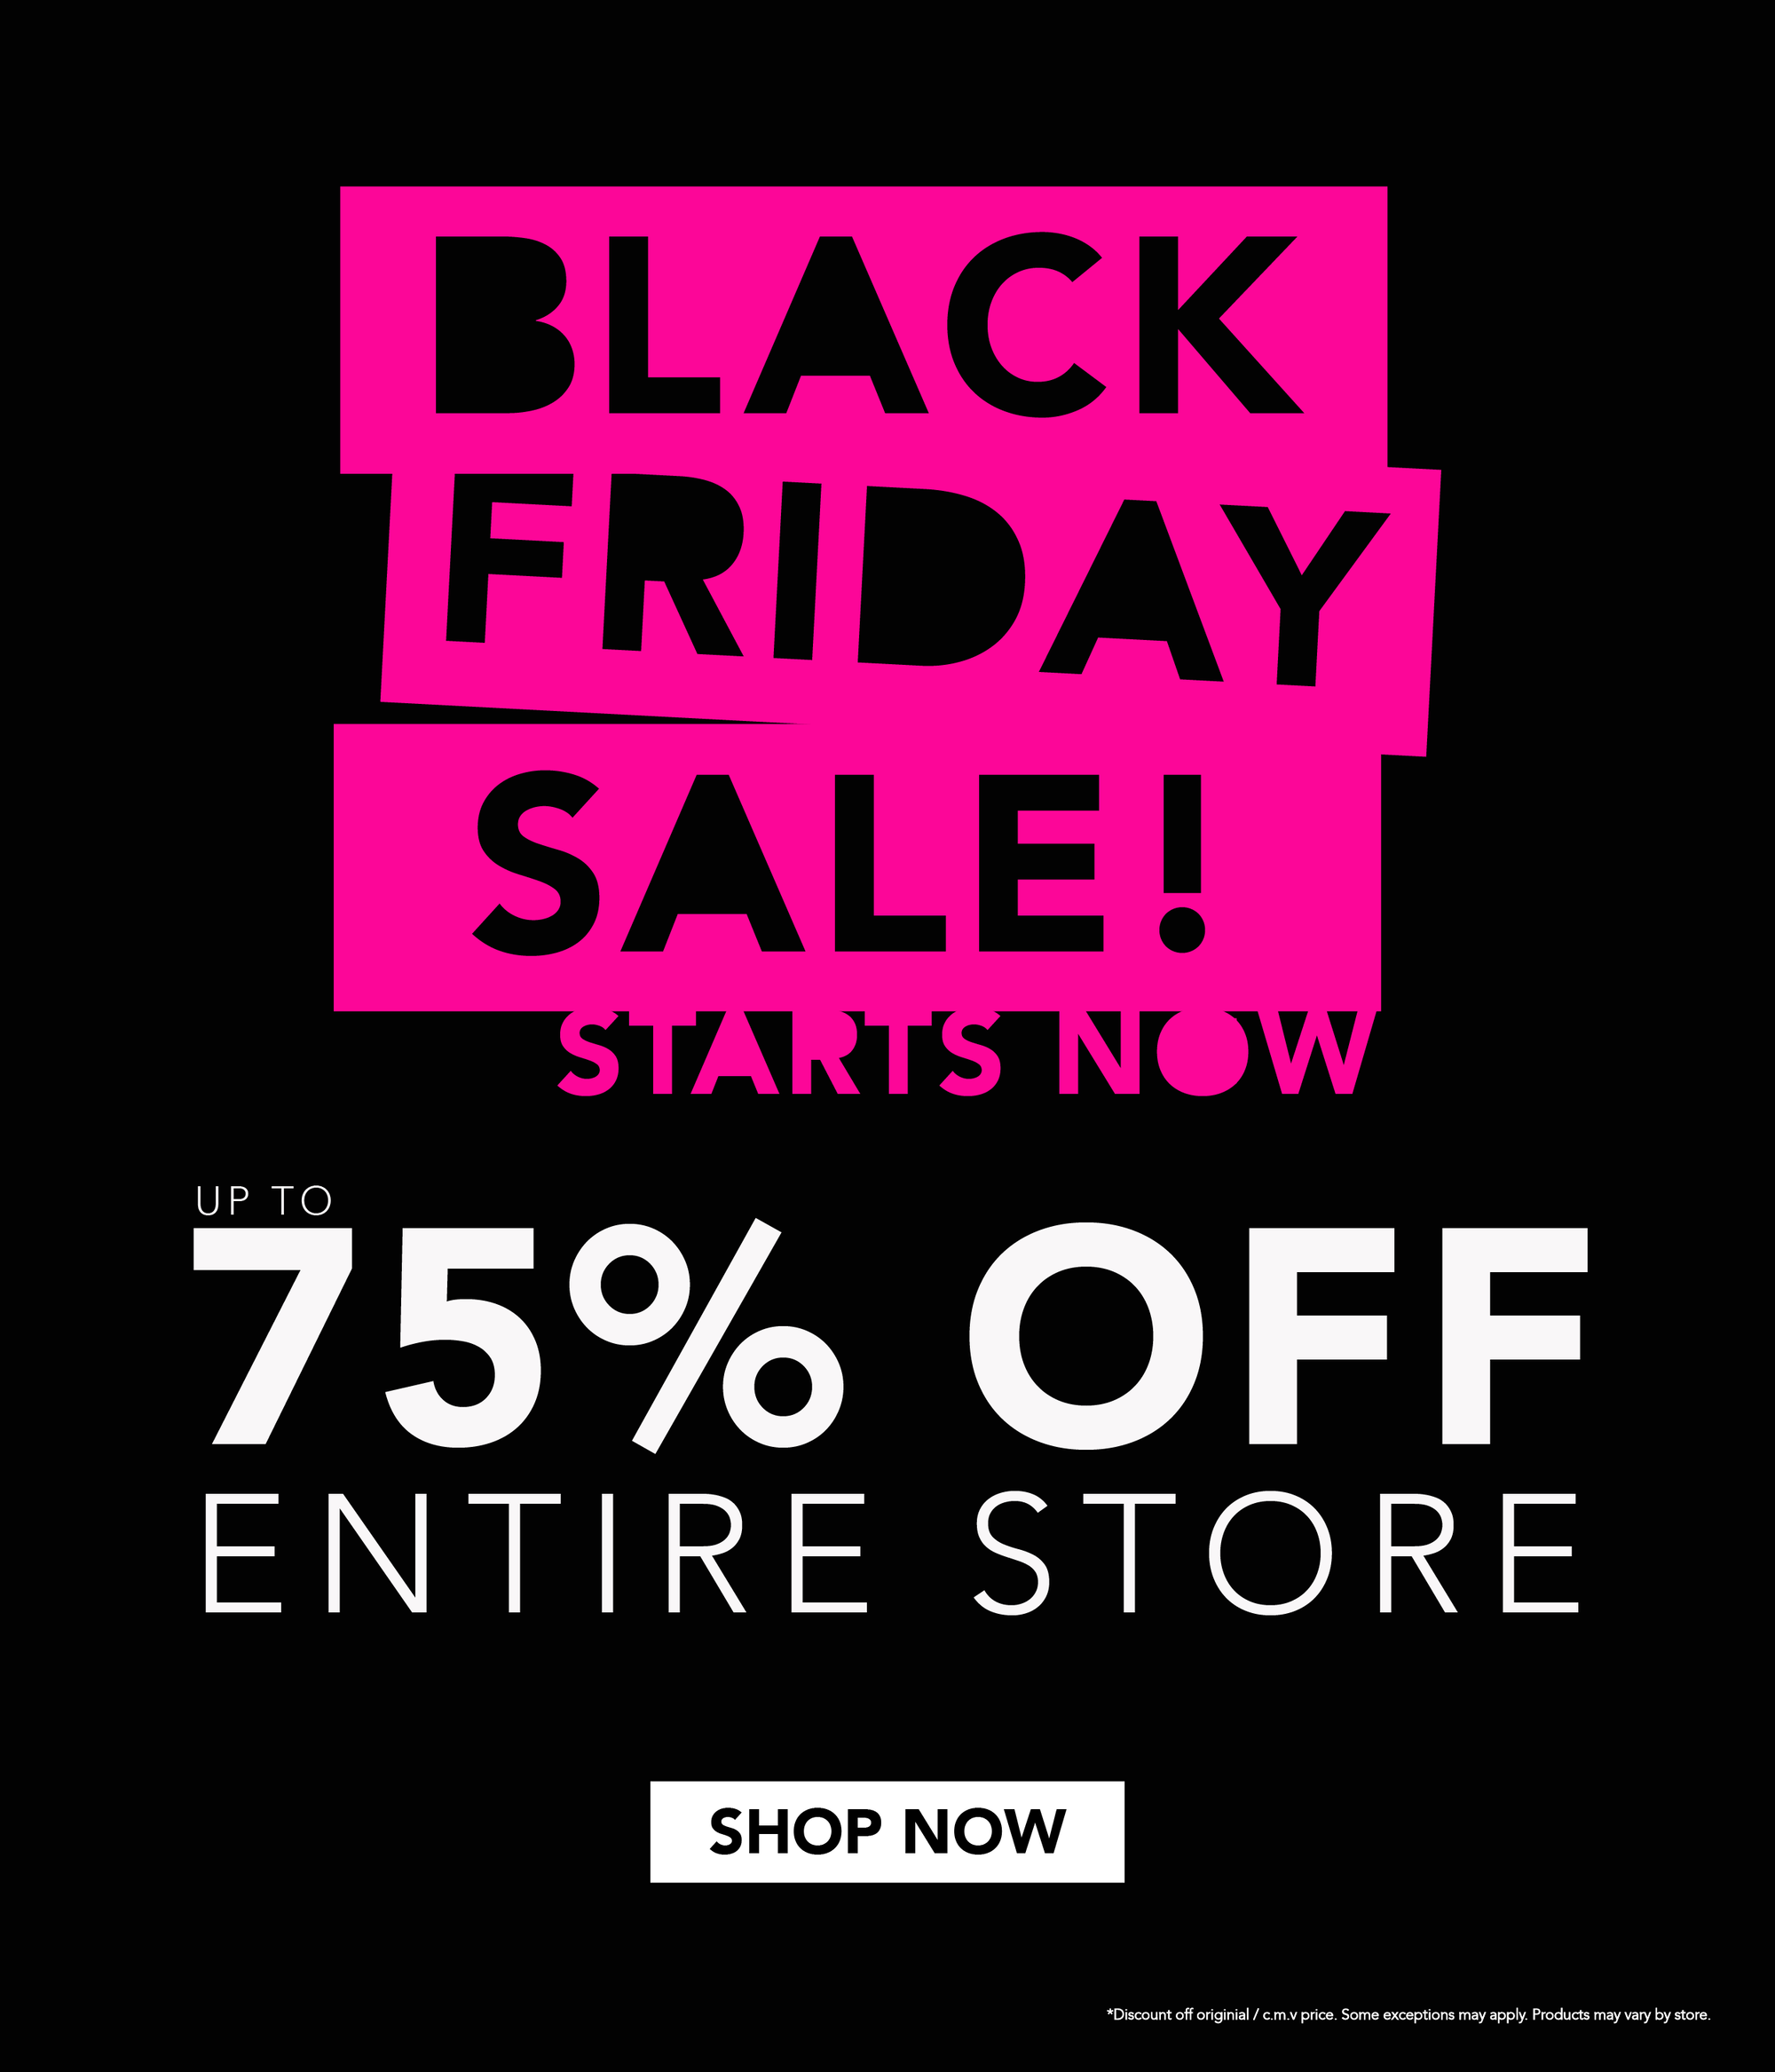 🎉 BLACK FRIDAY SALE STARTS NOW! UP TO 75% OFF ENTIRE STORE! 🎉